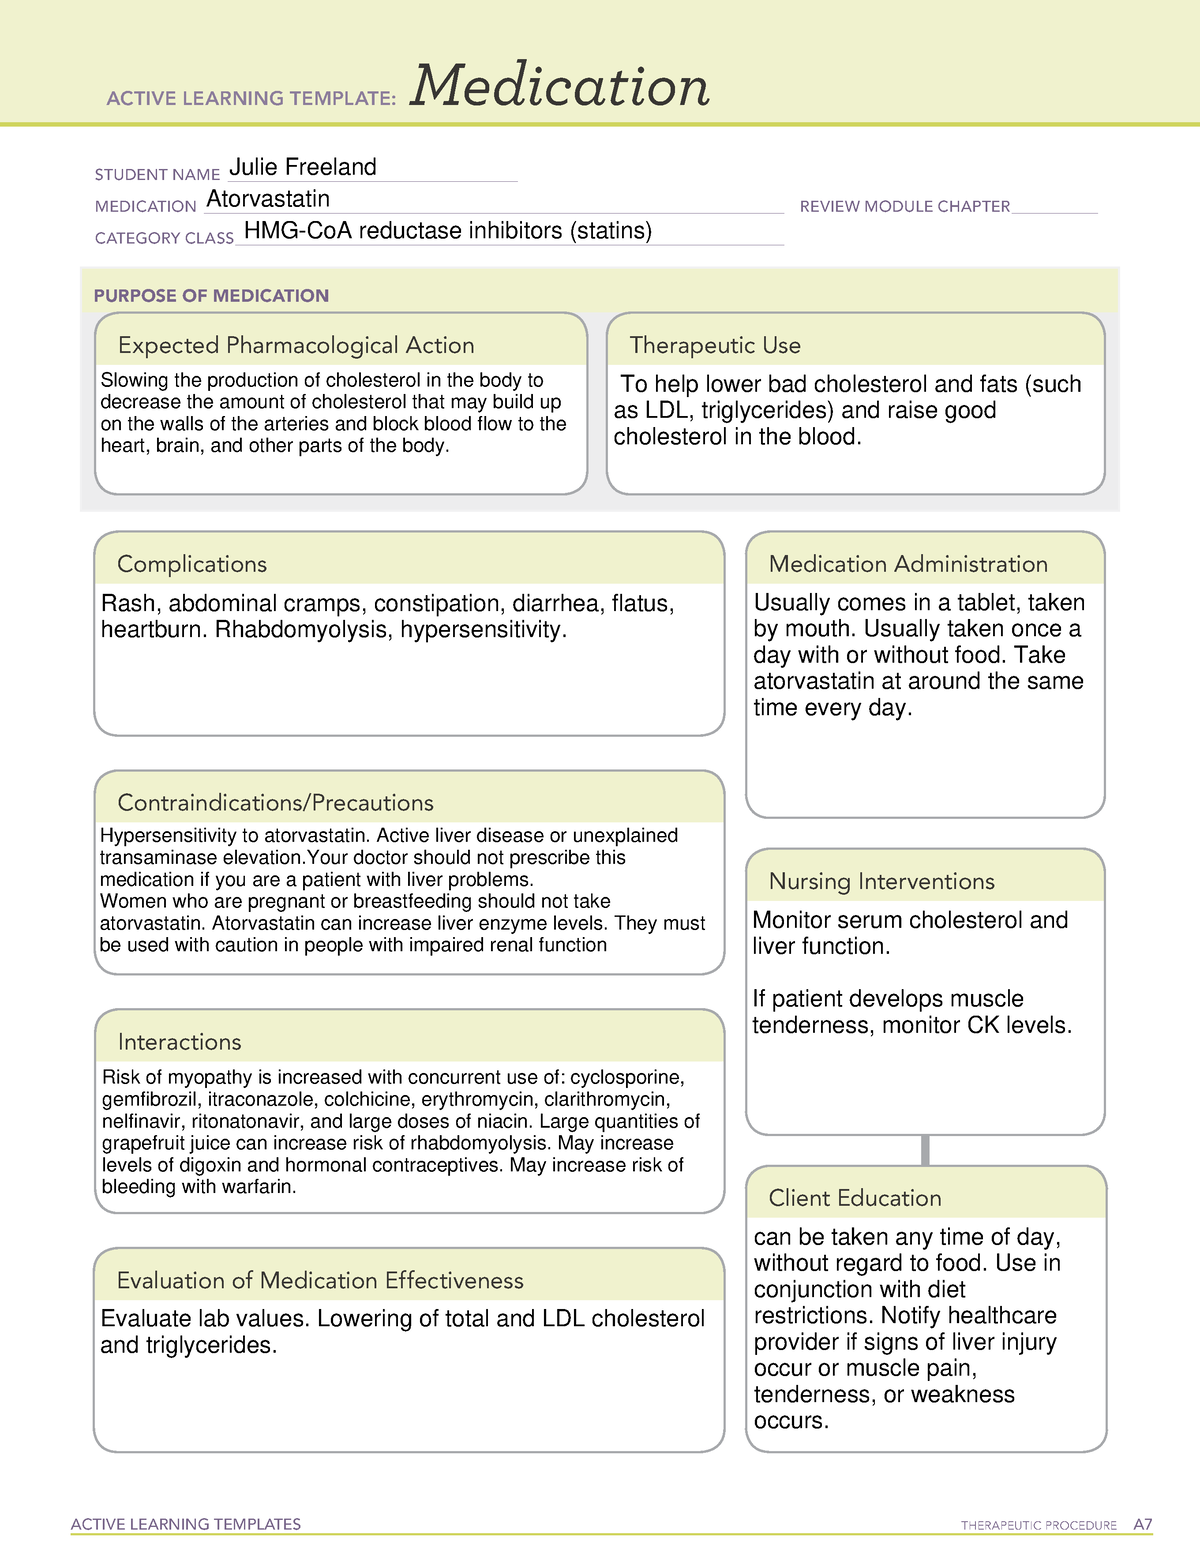 Active Learning Template Atorvastatin ACTIVE LEARNING TEMPLATES